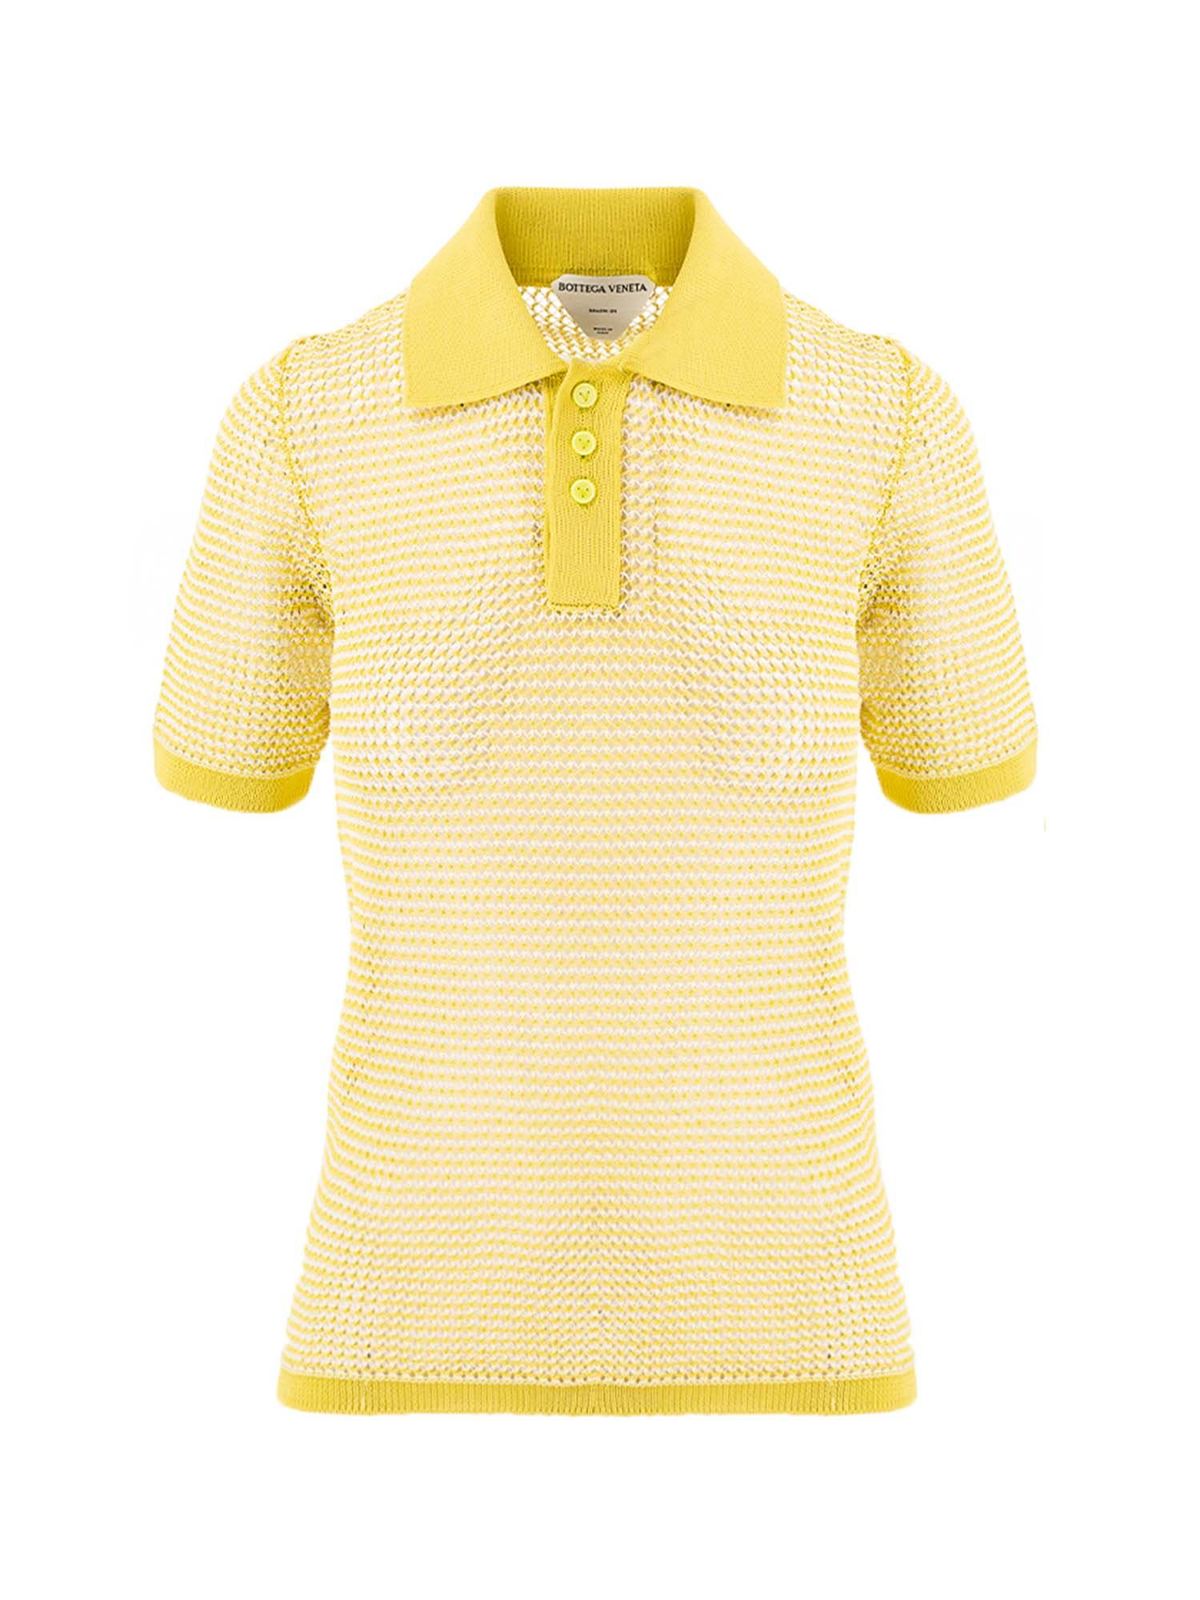 Knitted polo shirt in Seagrass String color